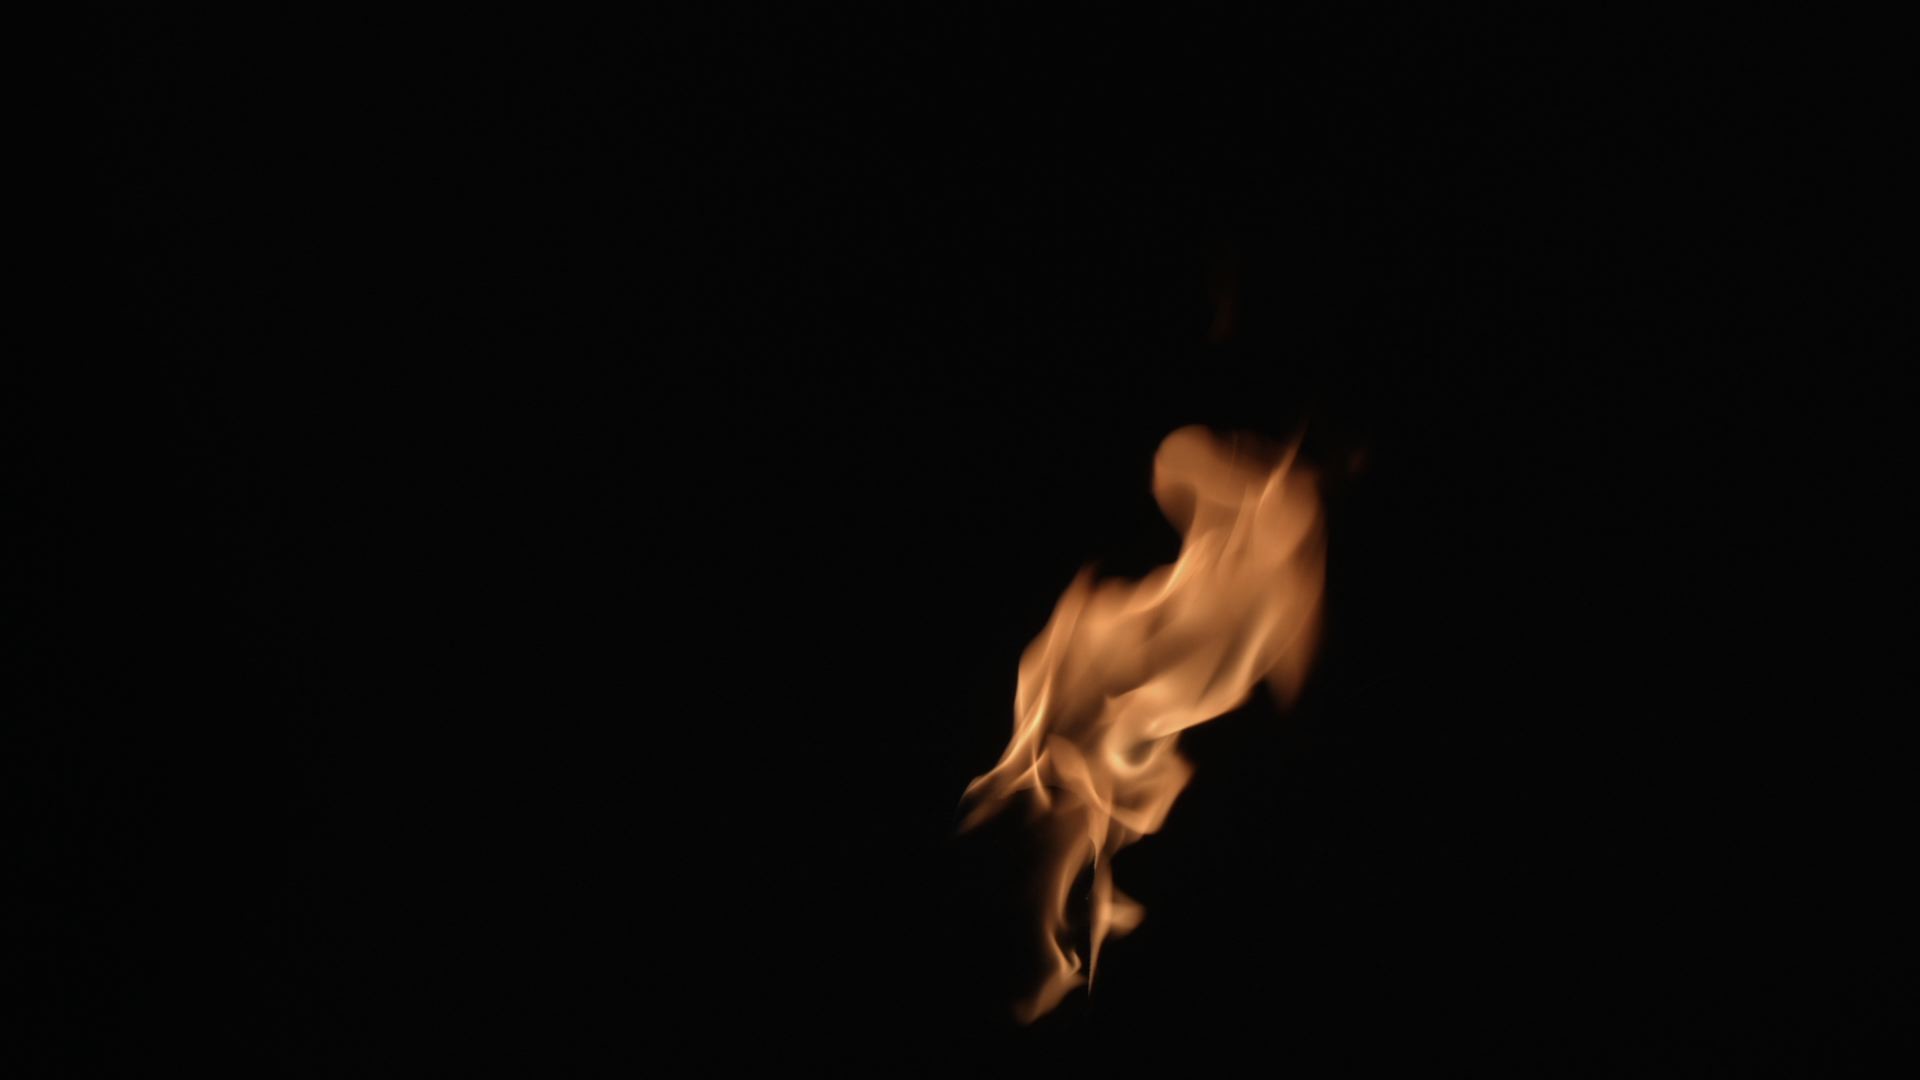 1920x1080 The flame element, shot at night in the garden to ensure a seamless black  background